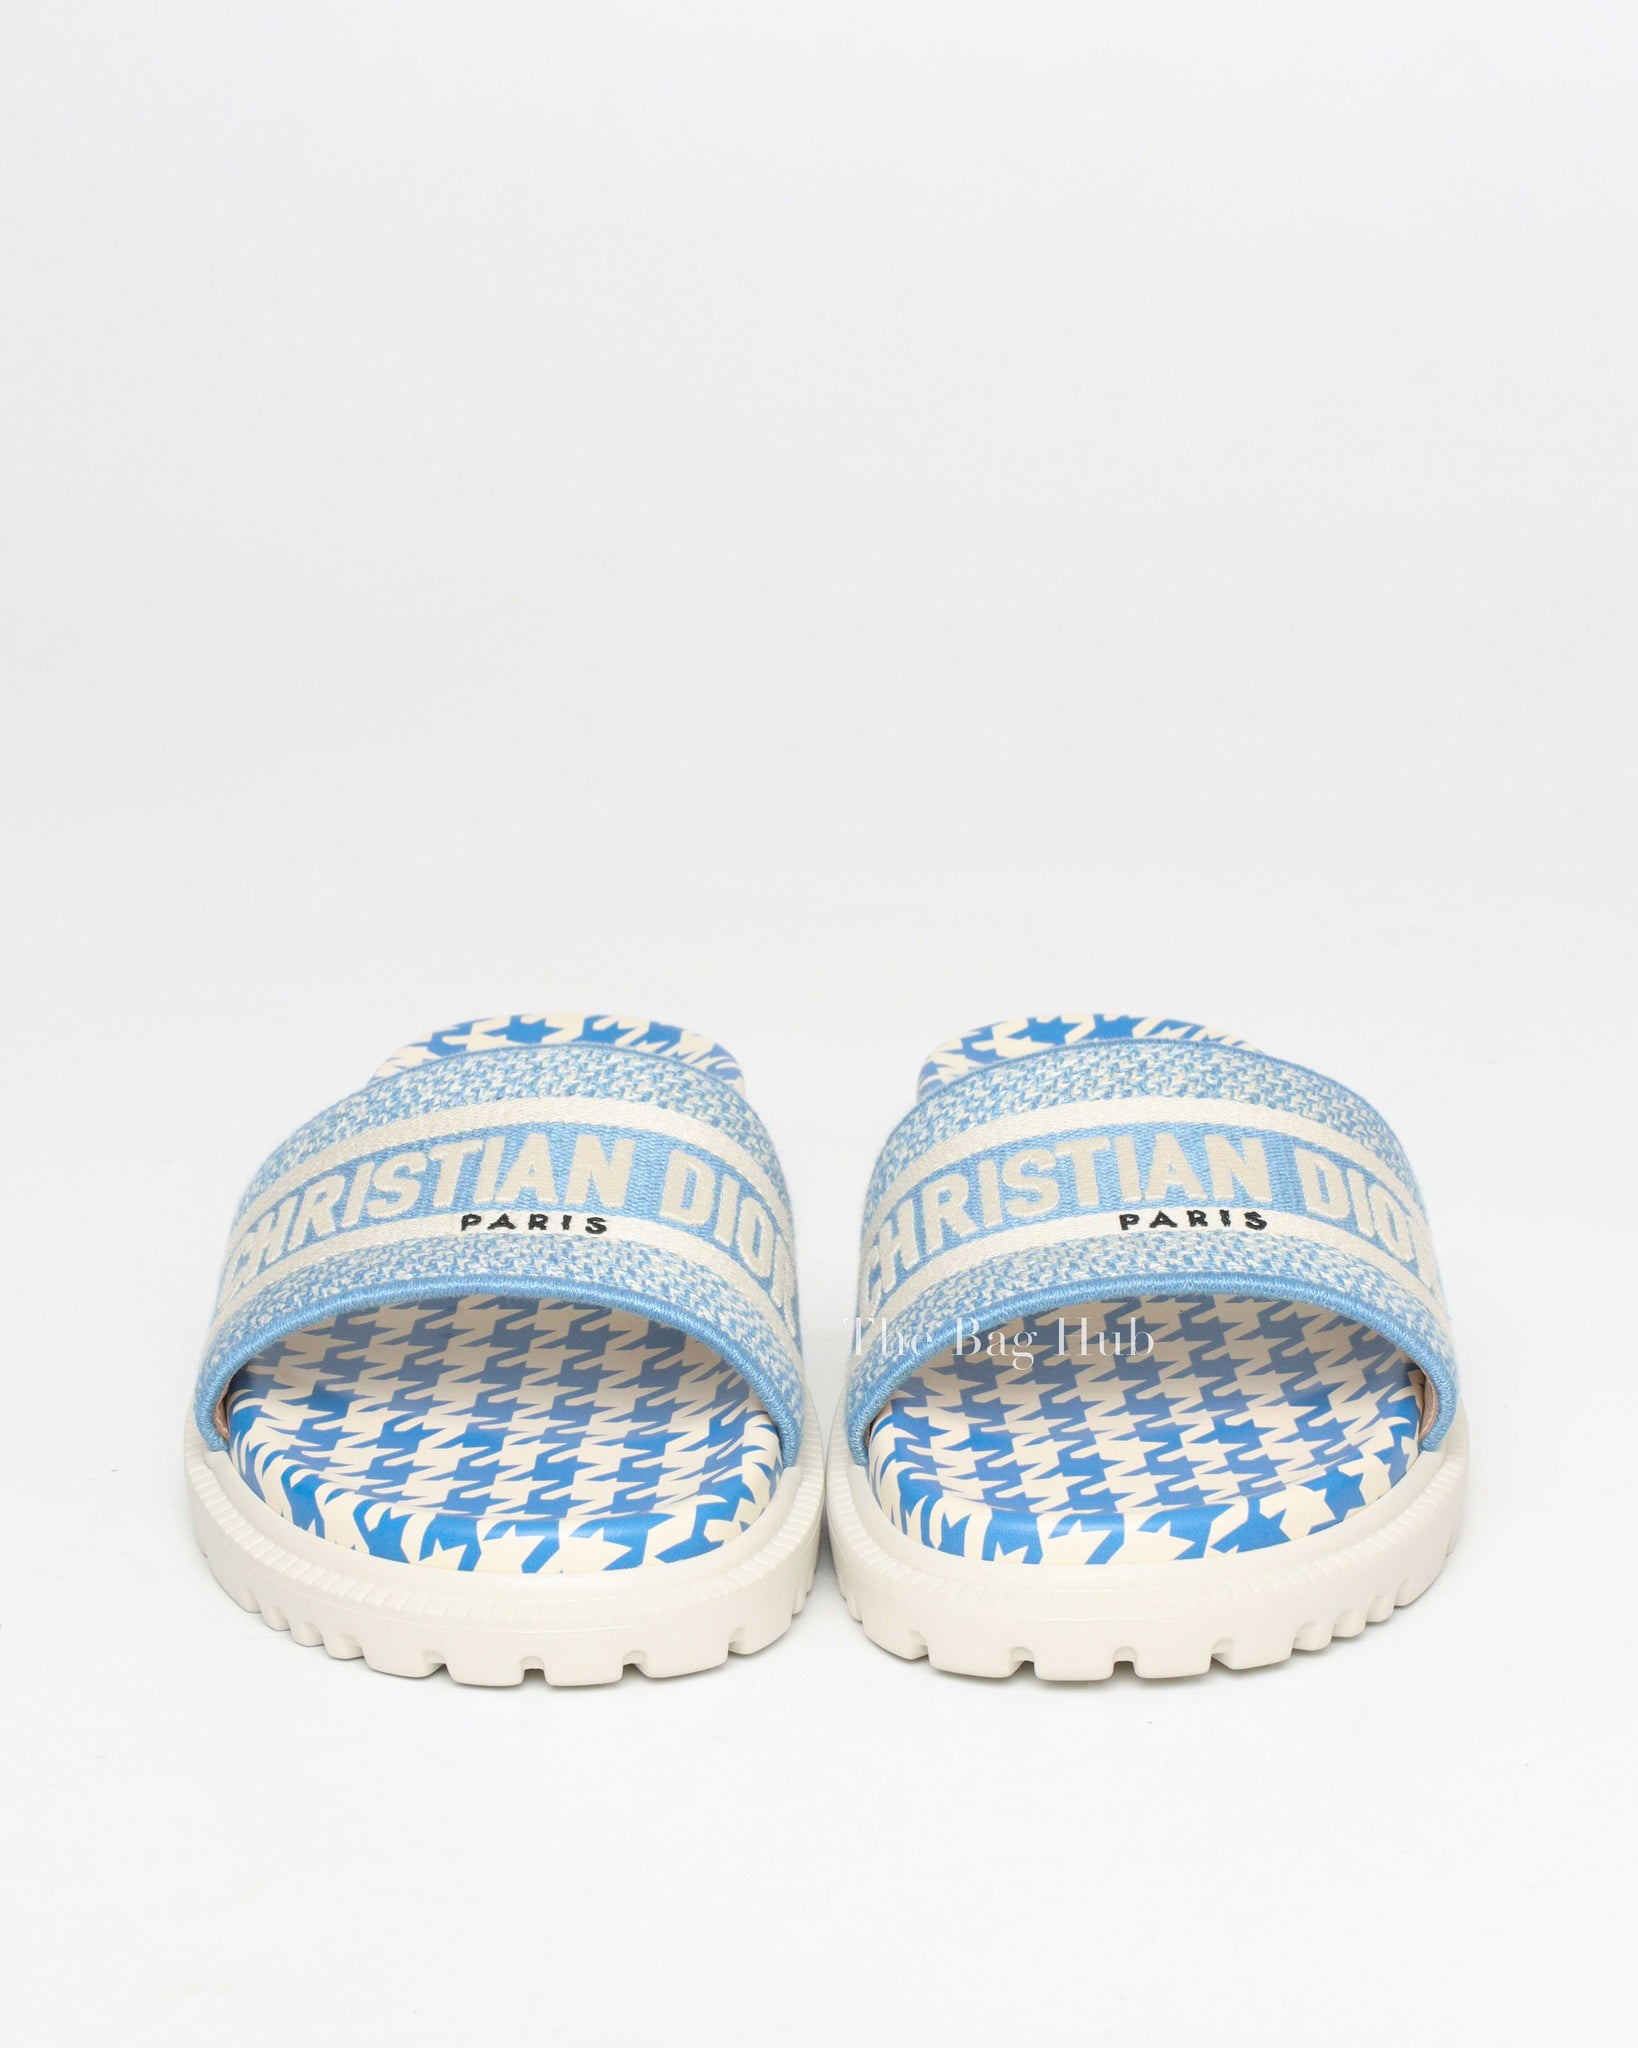 Christian Dior White/Blue Embroidered Canvas D'Way Sandals Size 40-3